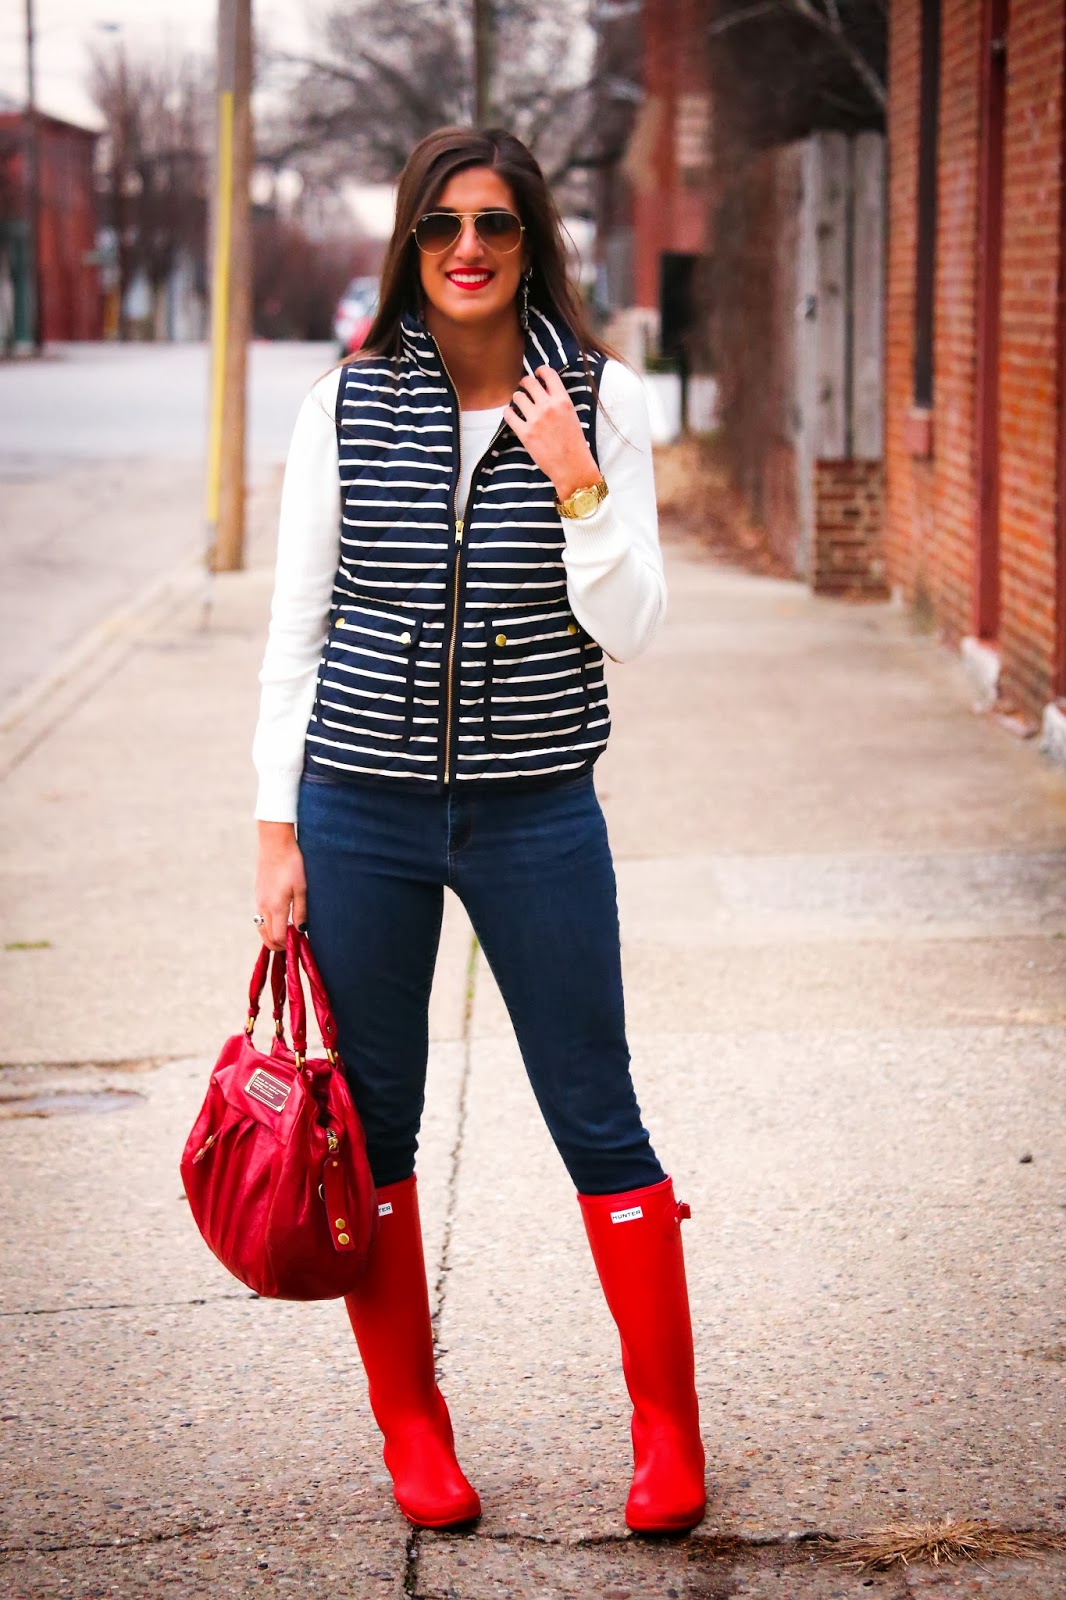 Sequins and Stripes | A Southern Drawl